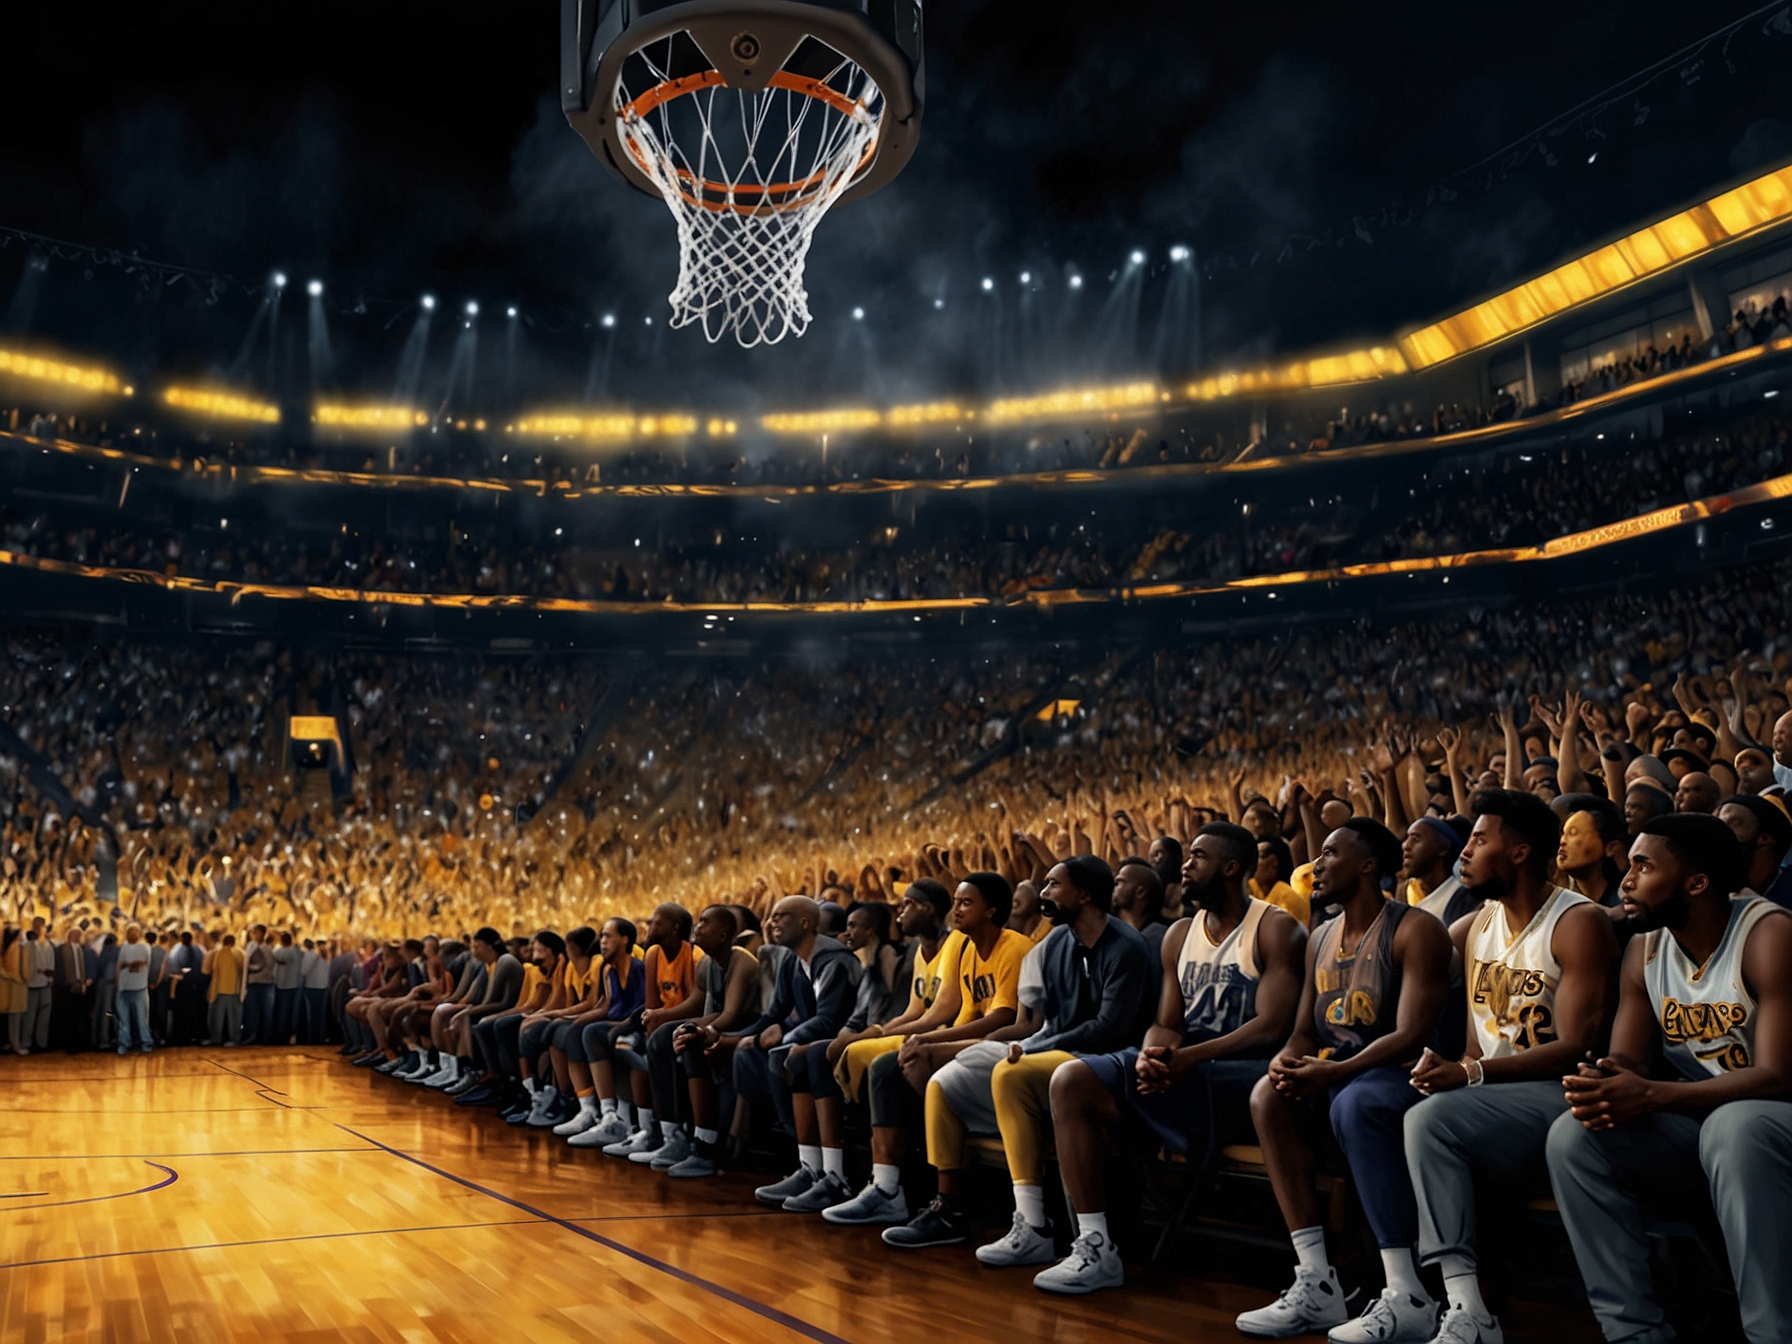 An electrifying basketball arena packed with fans, capturing the intense energy and deafening roar of the crowd, setting the scene for Kobe Bryant's legendary 'Black Mamba' transformation.